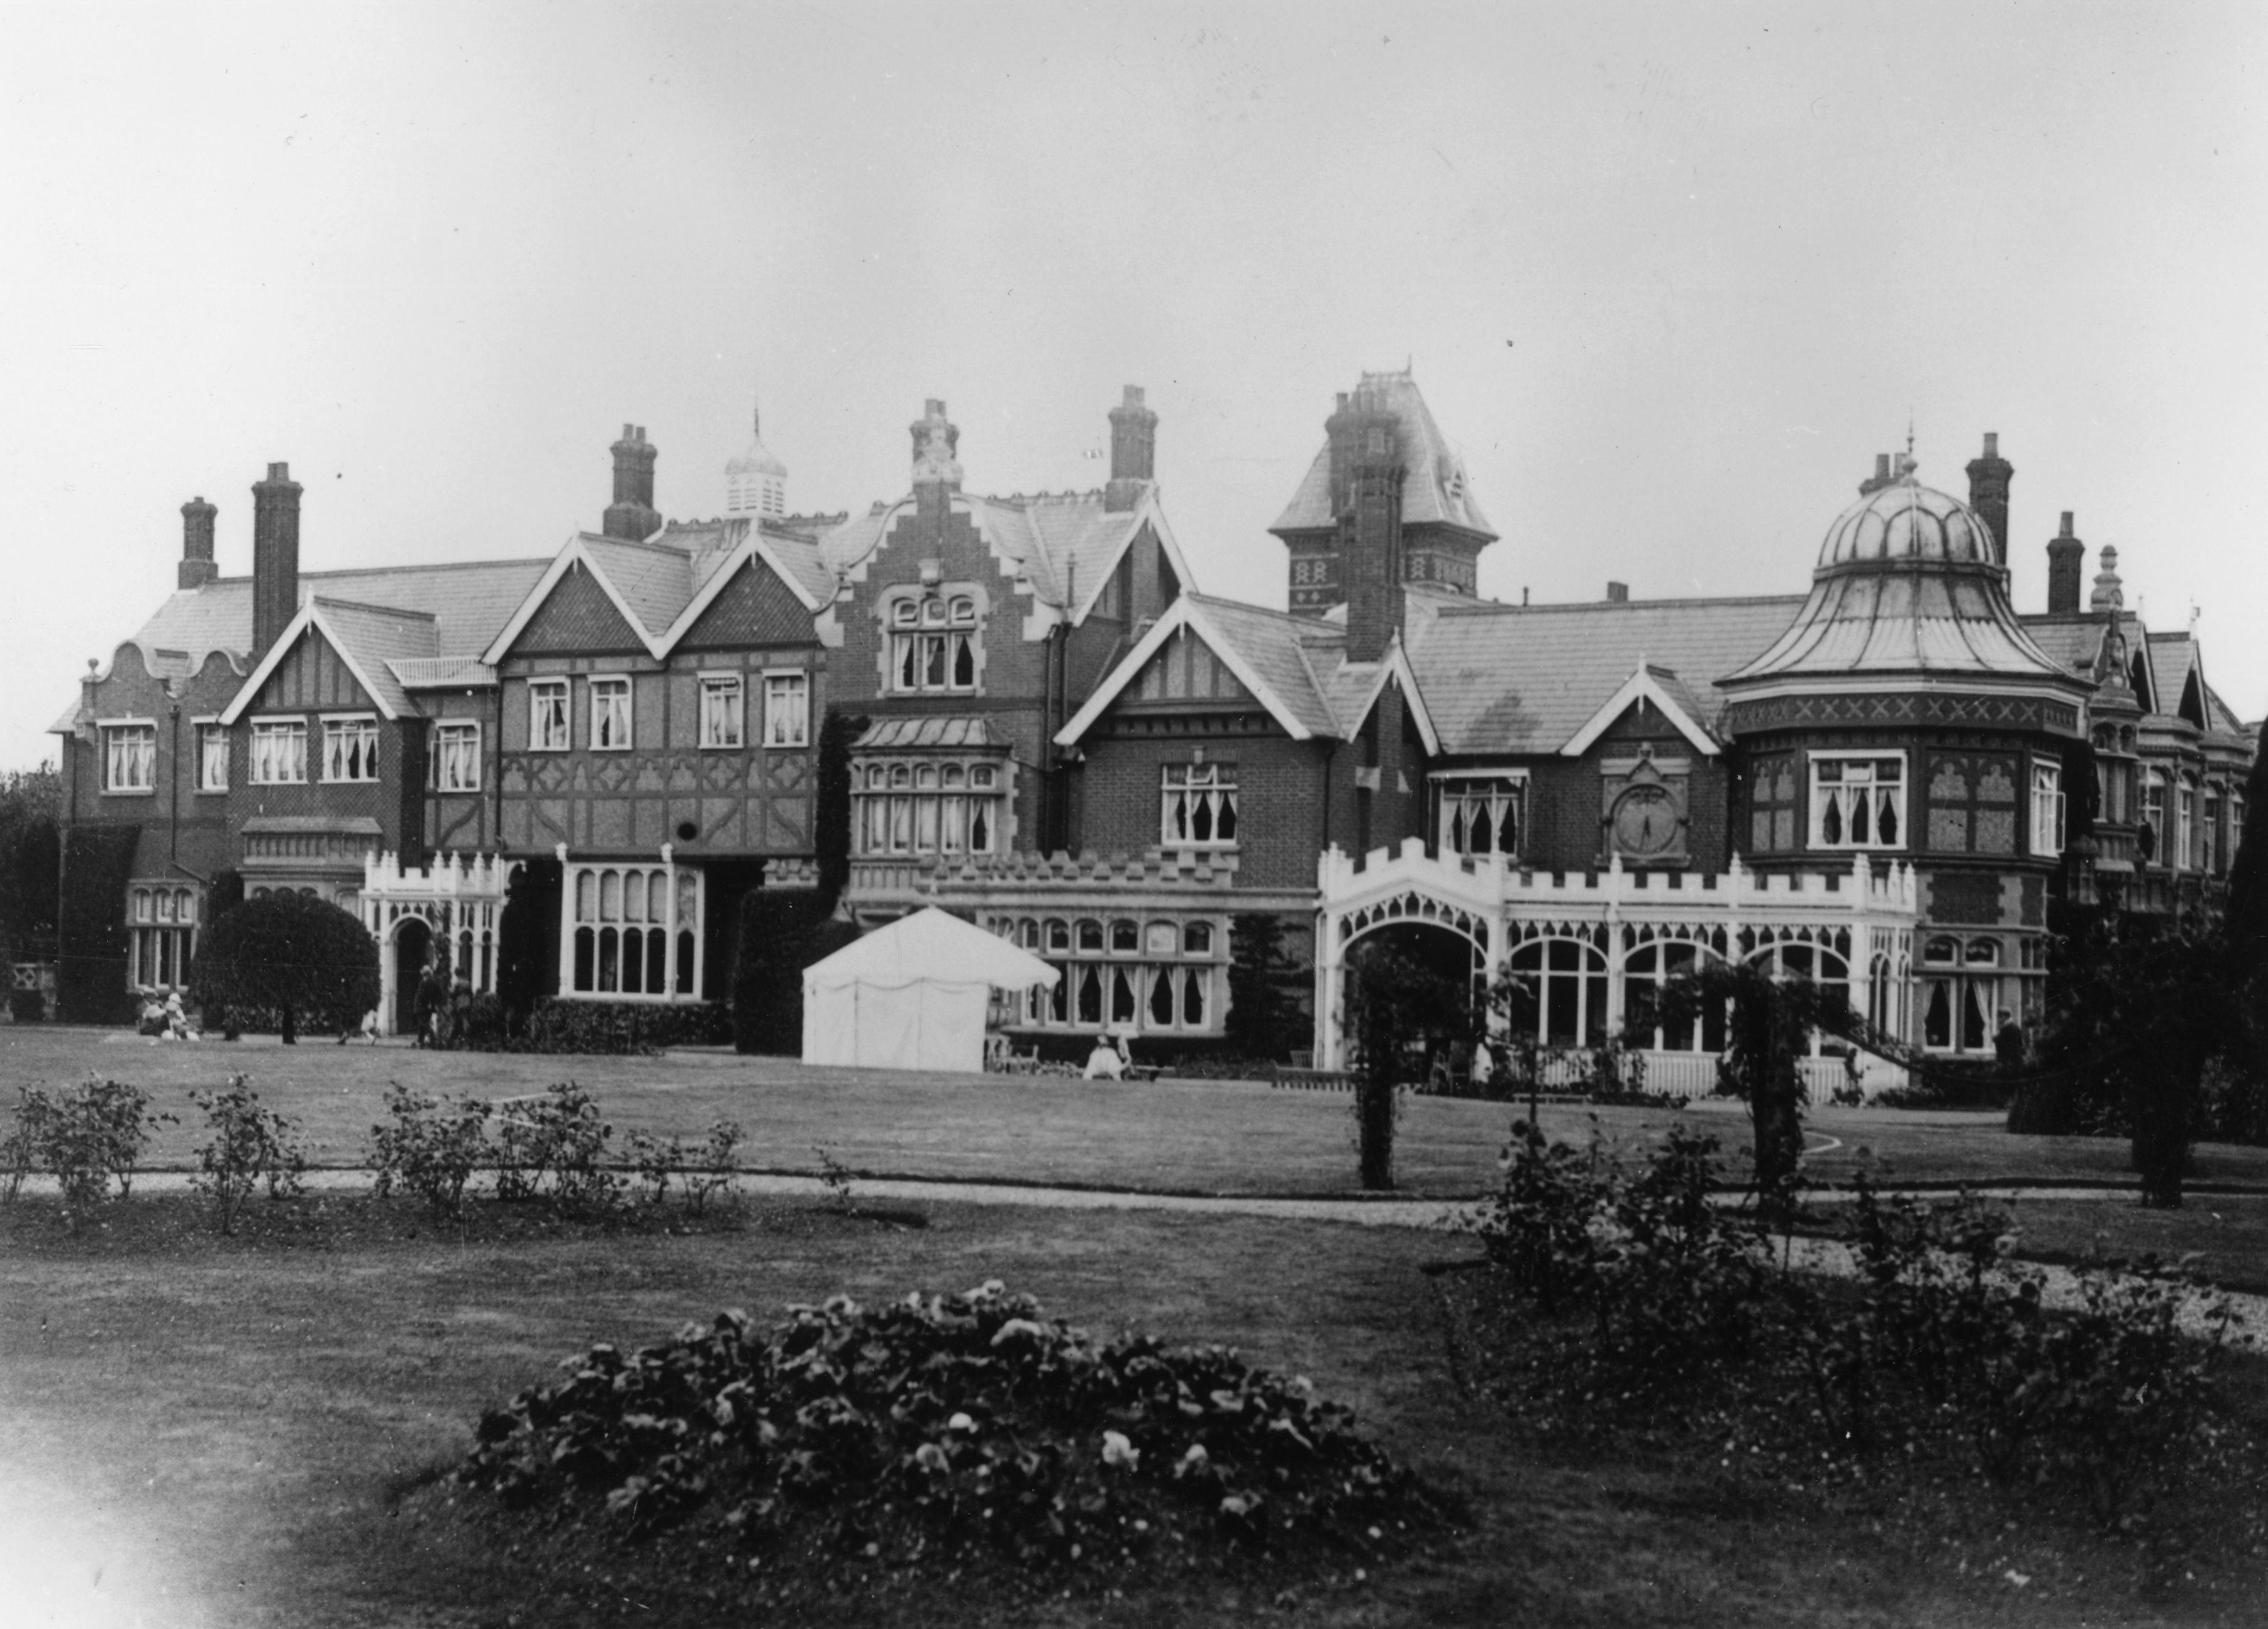 Britain’s WWII codebreaking hub Bletchley Park given £1 million by Facebook